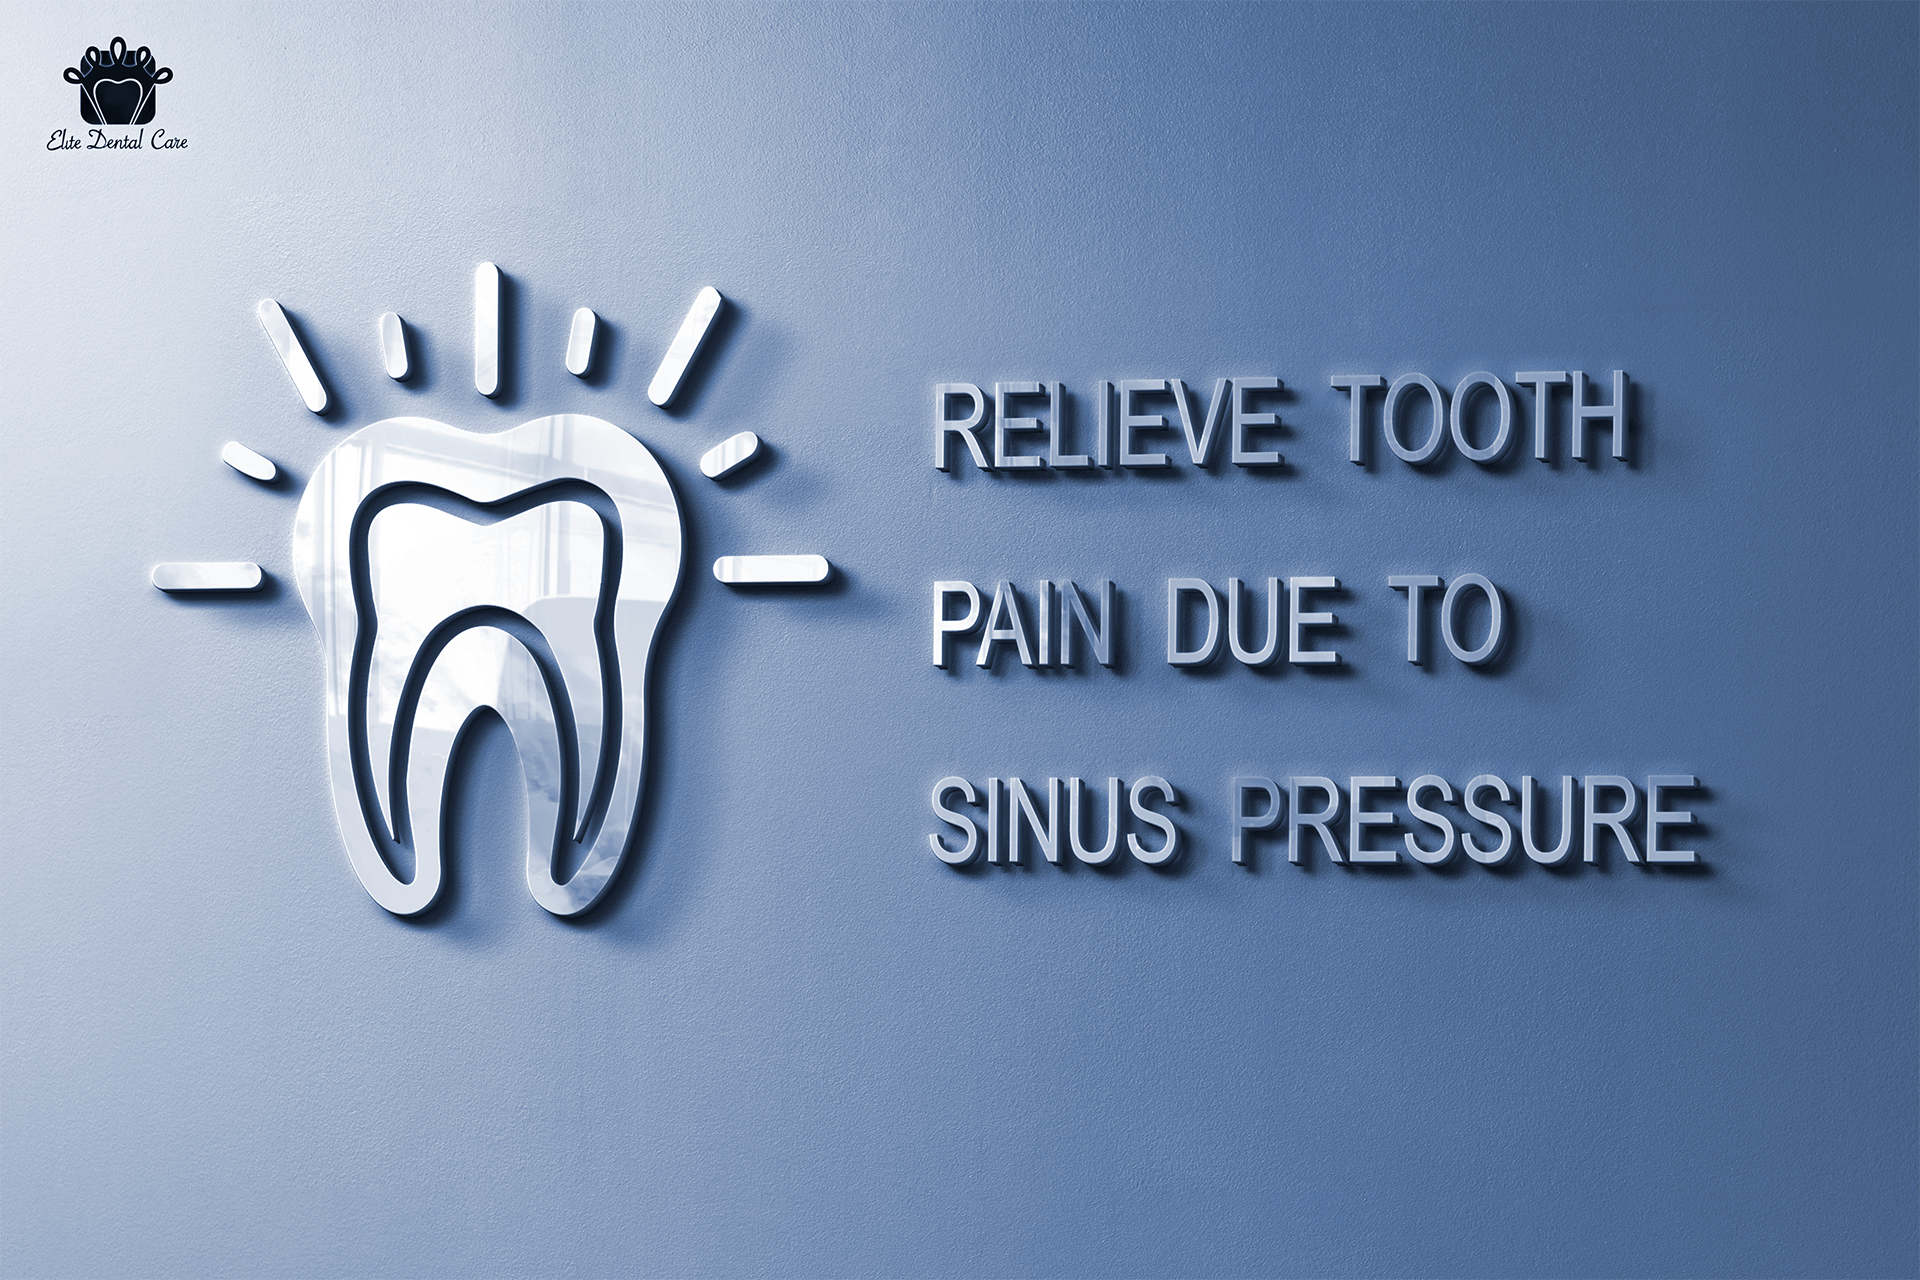 How to Relieve Tooth Pain Due to Sinus Pressure? – Elite Dental Care Tracy